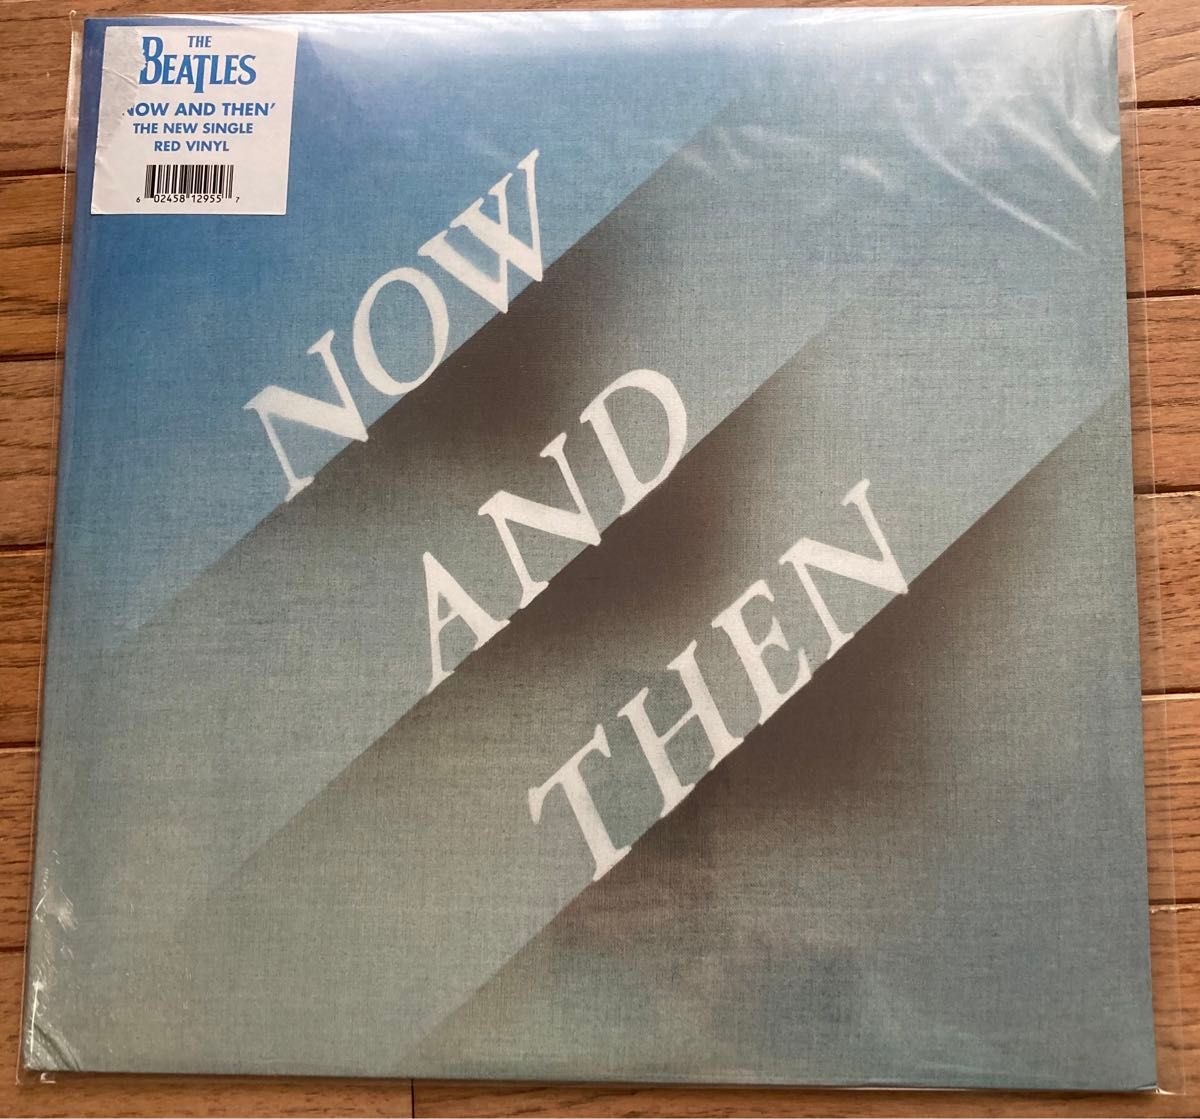 THE BEATLES「NOW AND THEN」　　　Red Vinyl 12   タワーレコード限定輸入盤　　　　新品・未開封